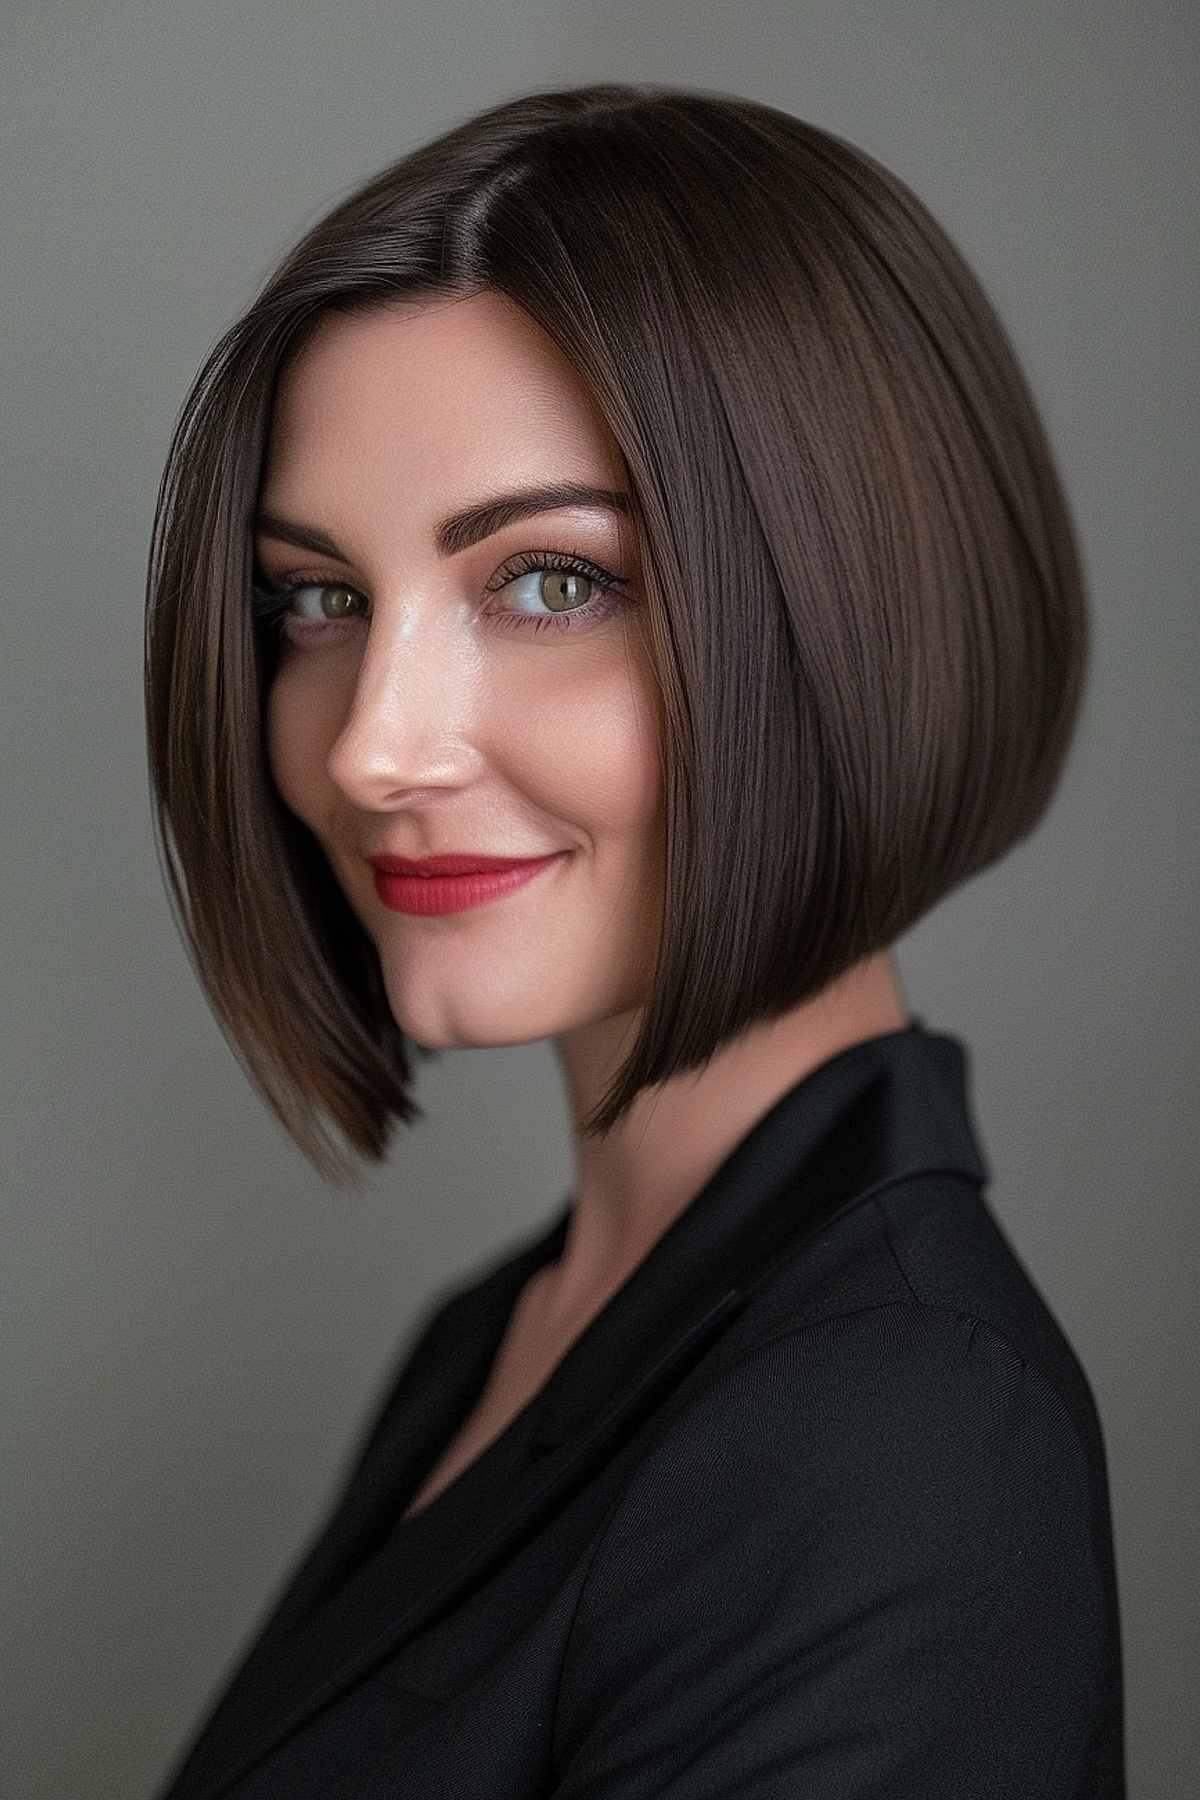 Dynamic angled bob haircut with longer front pieces and shorter back, ideal for straight, medium to thick hair.